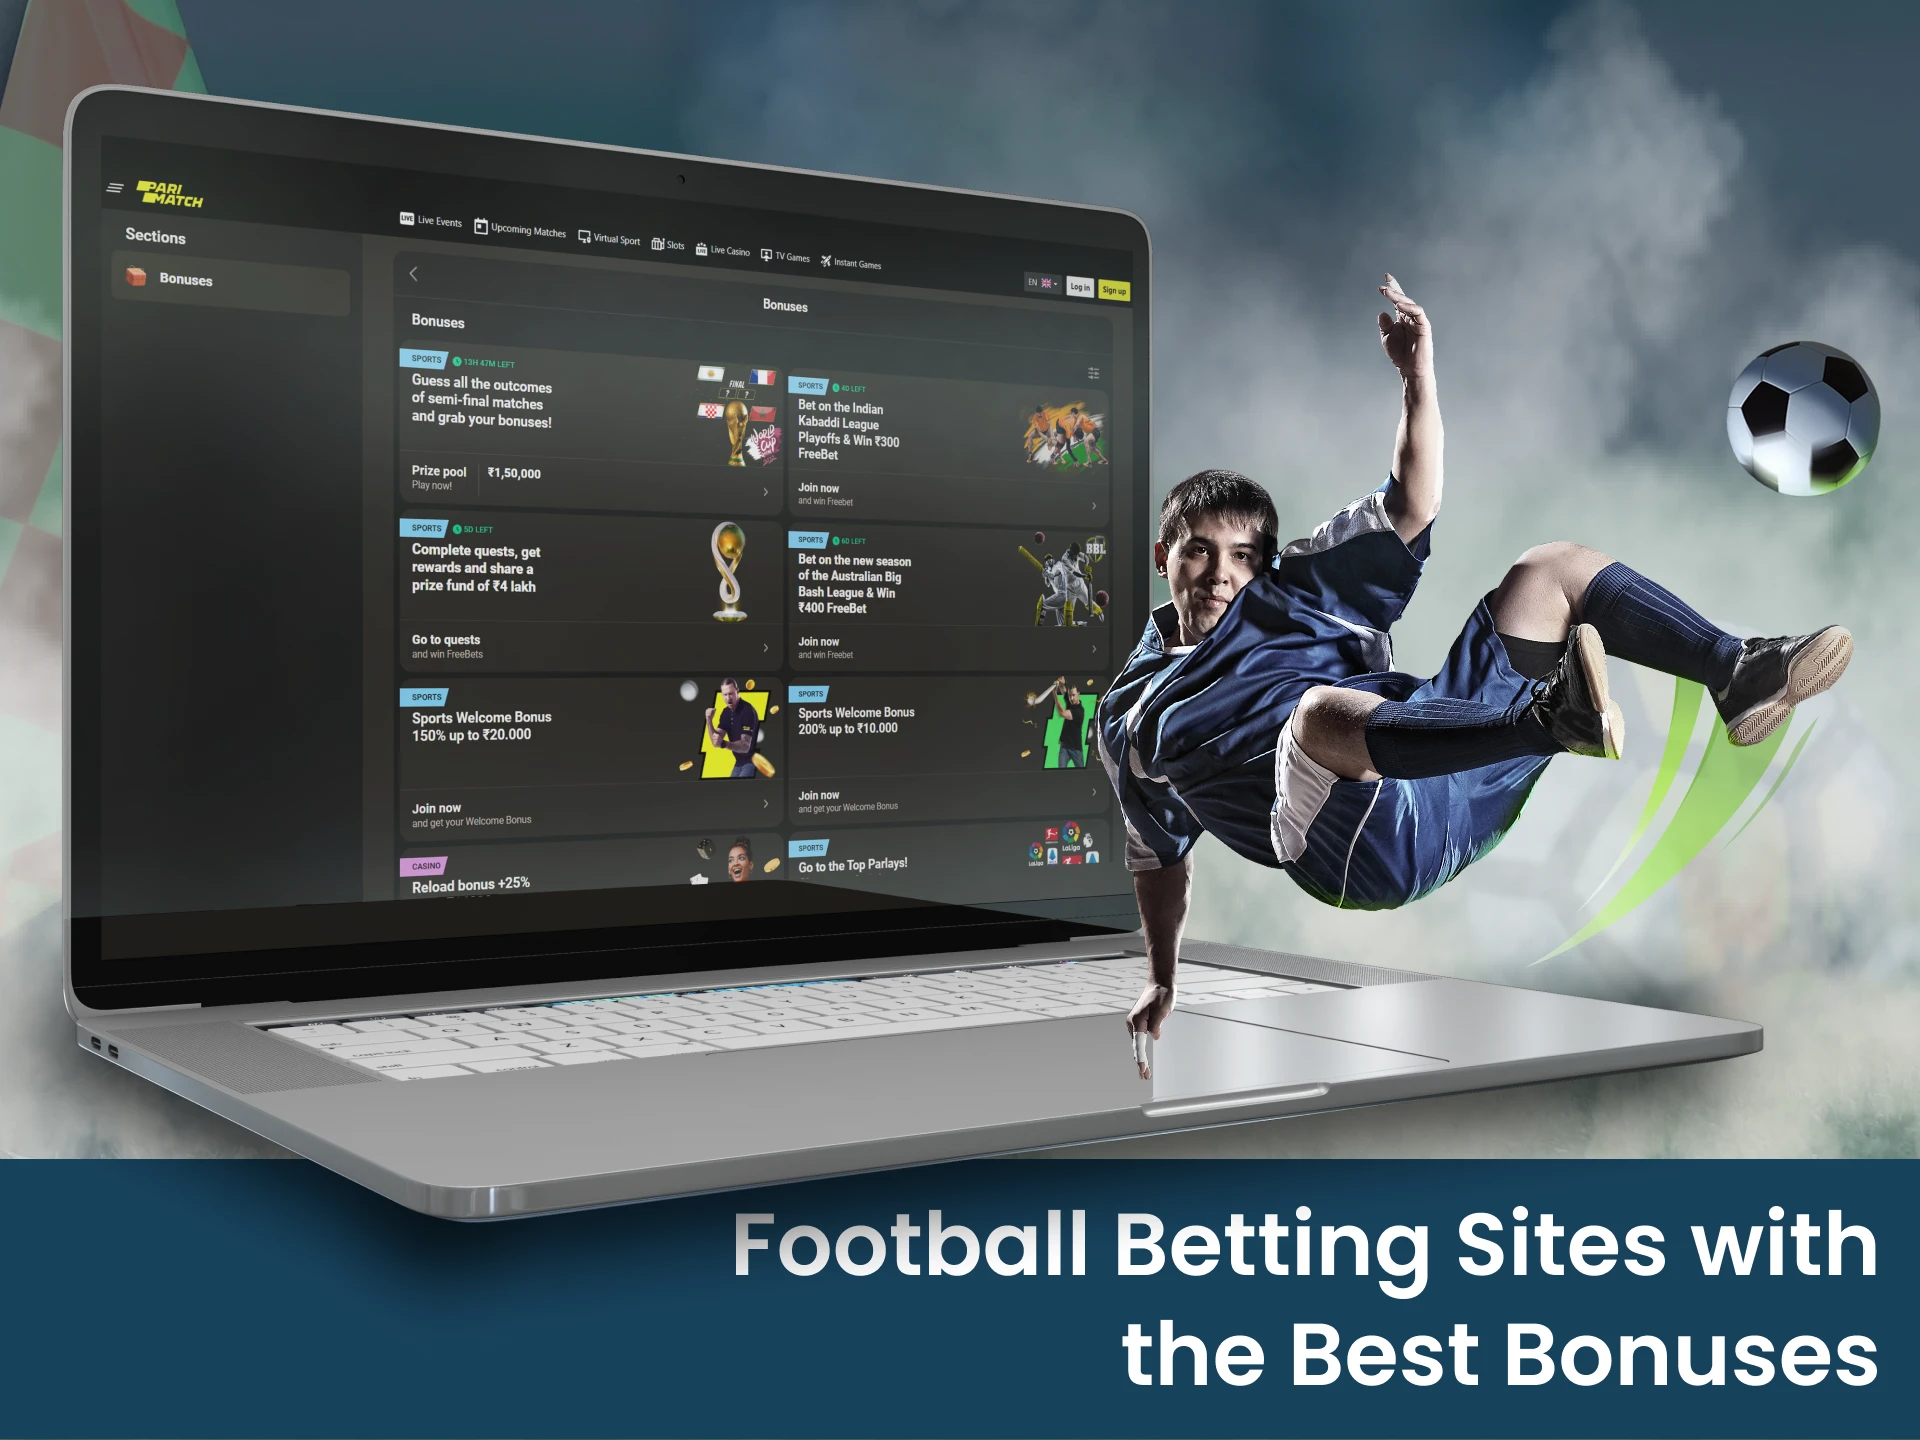 On these websites you will find the best bonuses on football betting.